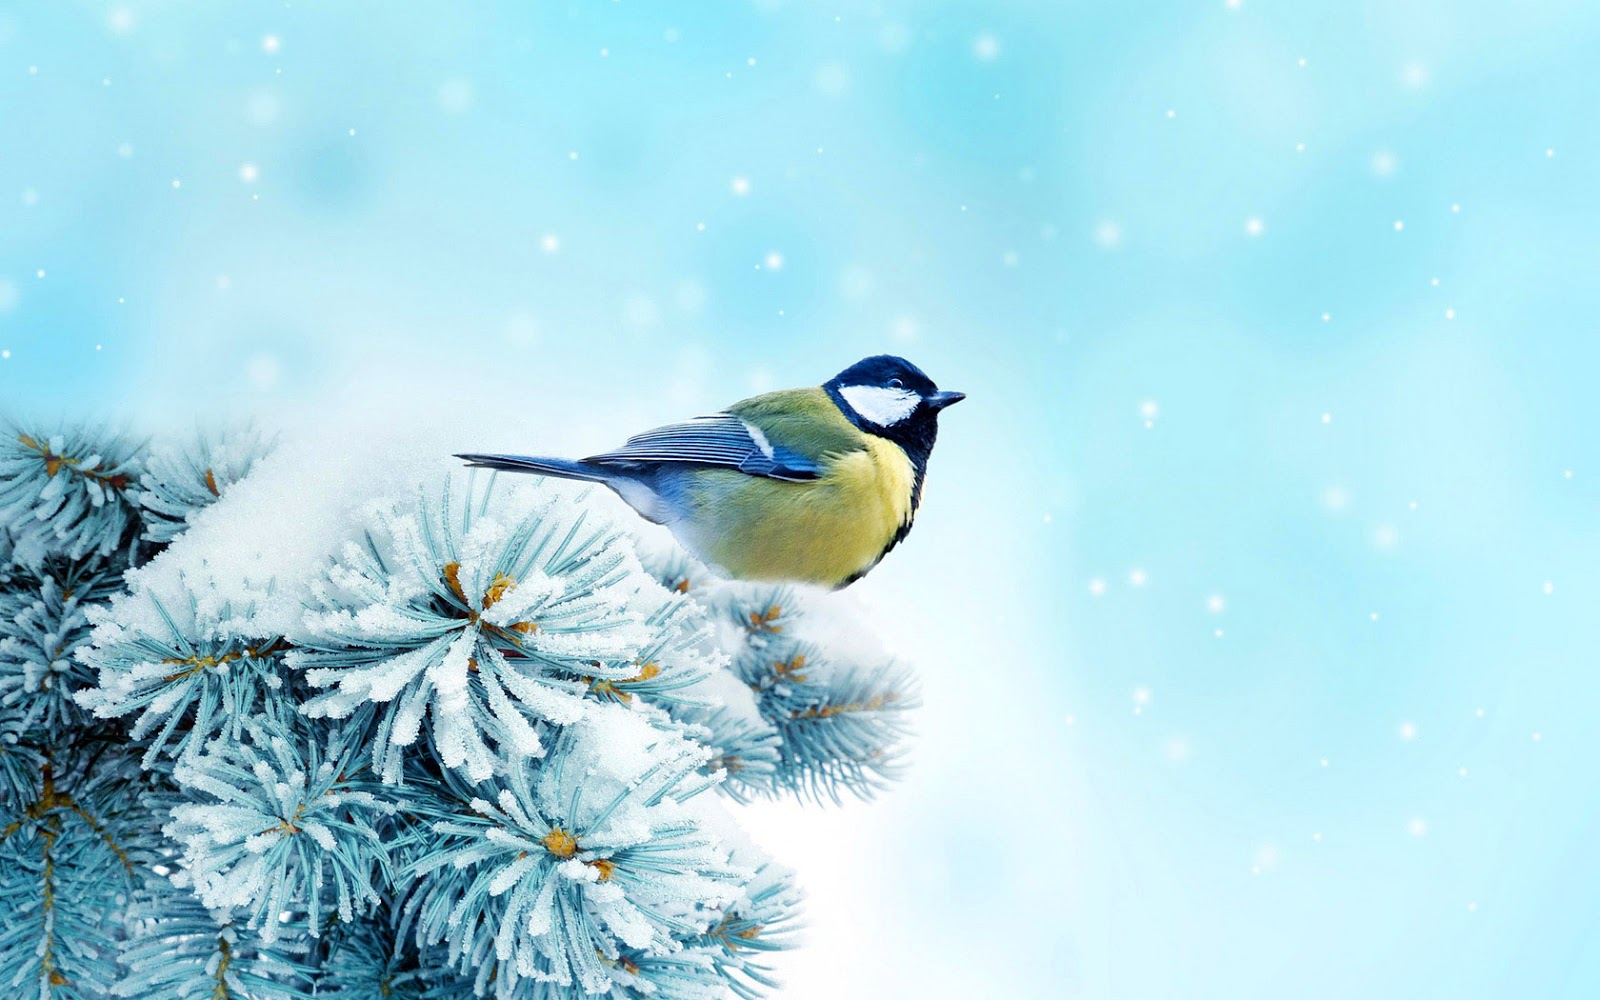 Bird On A Branch Covered With Snow In The Winter HD Birds Wallpaper